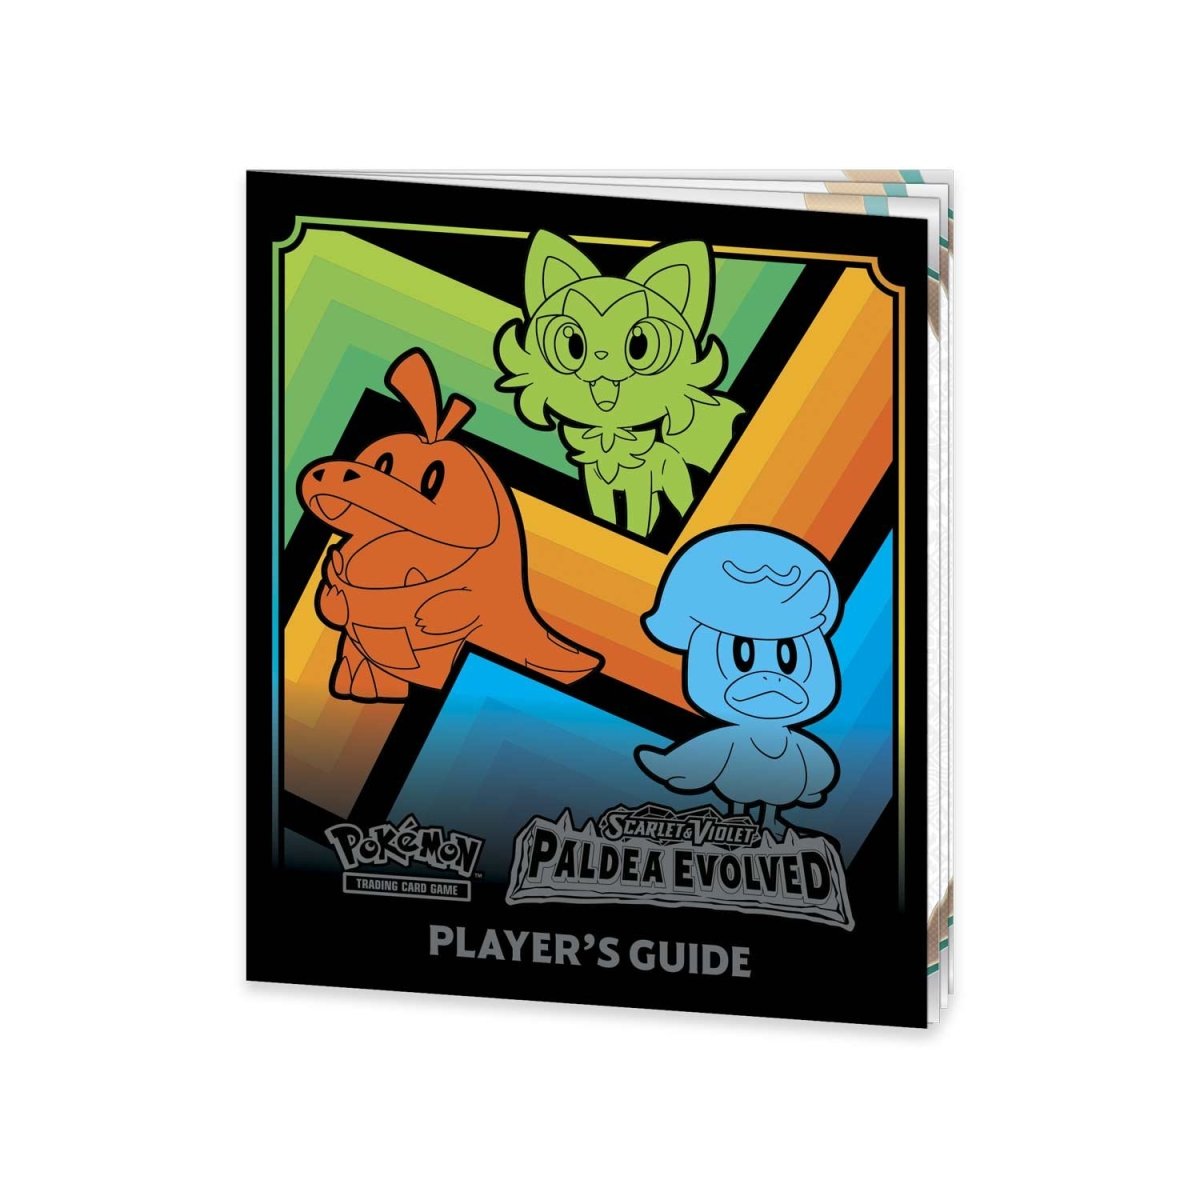 Front view of The Pokemon Trading Card Game Scarlet and Violet Paldea Evolved Player's Guide.